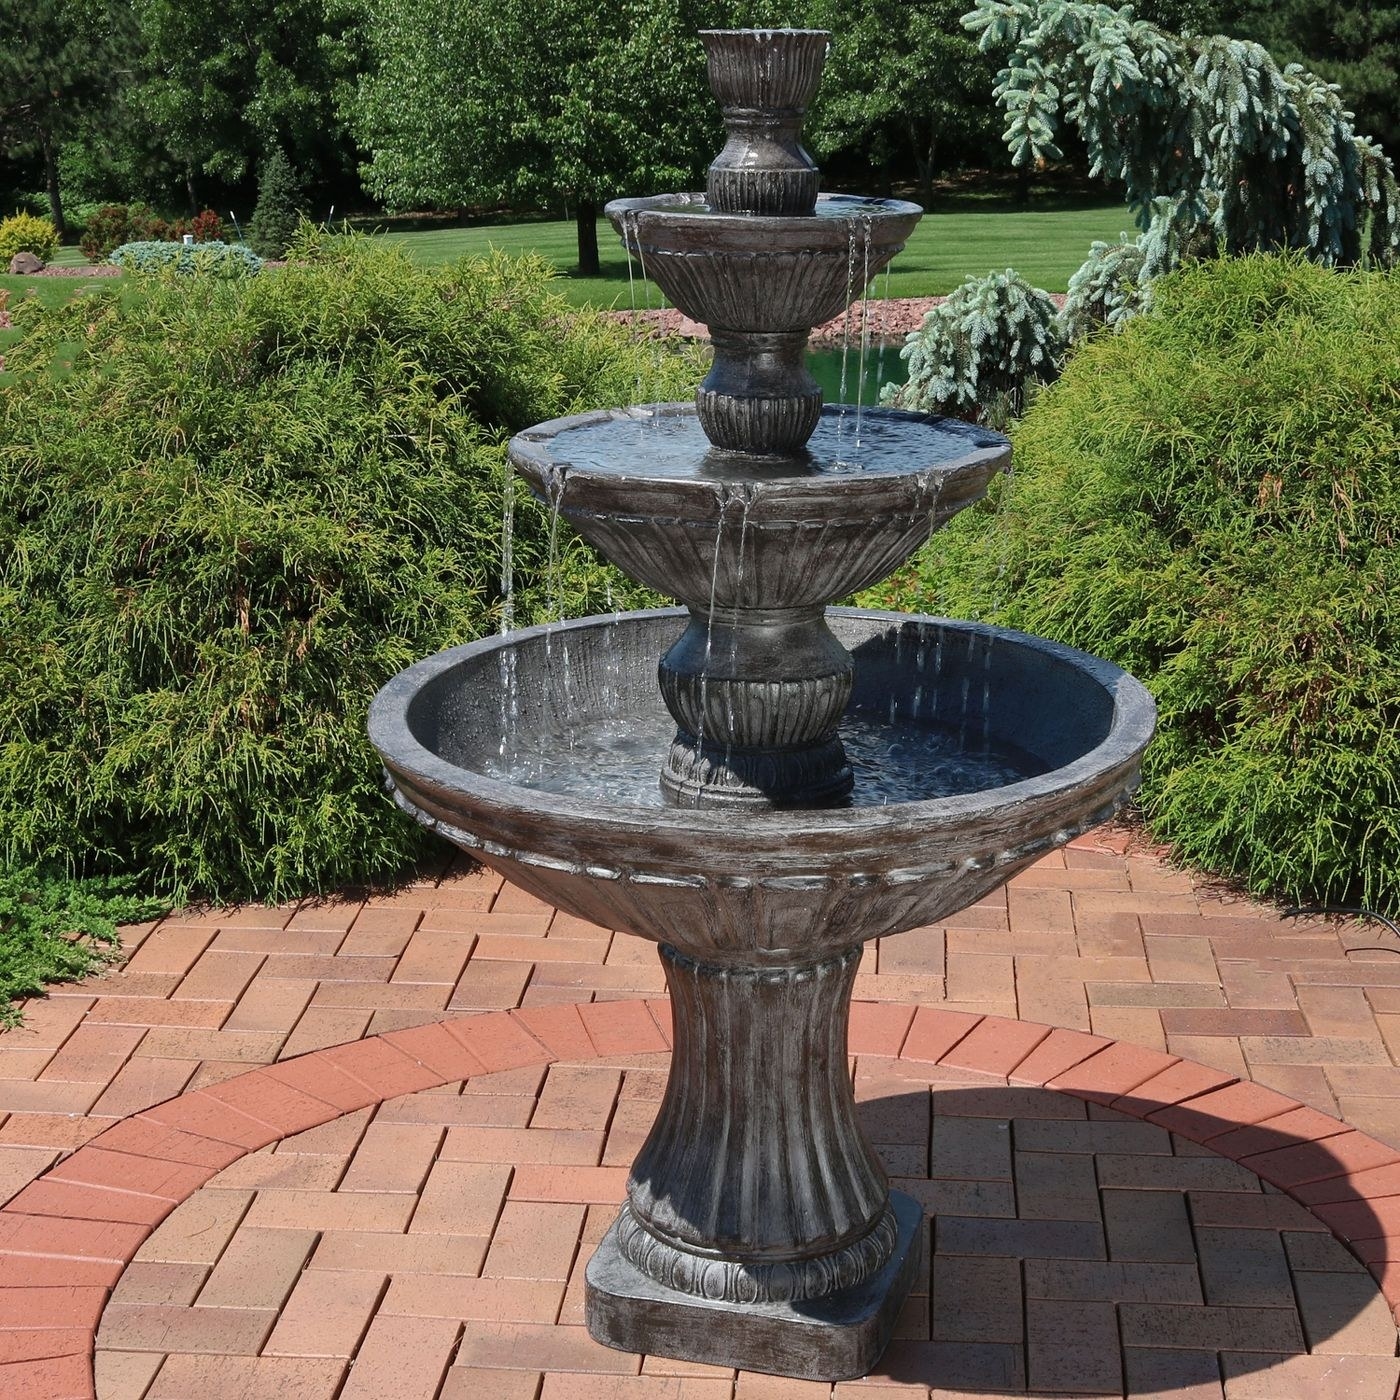 The three tiered fountain is grey and streams of water against a brick and green outdoor area